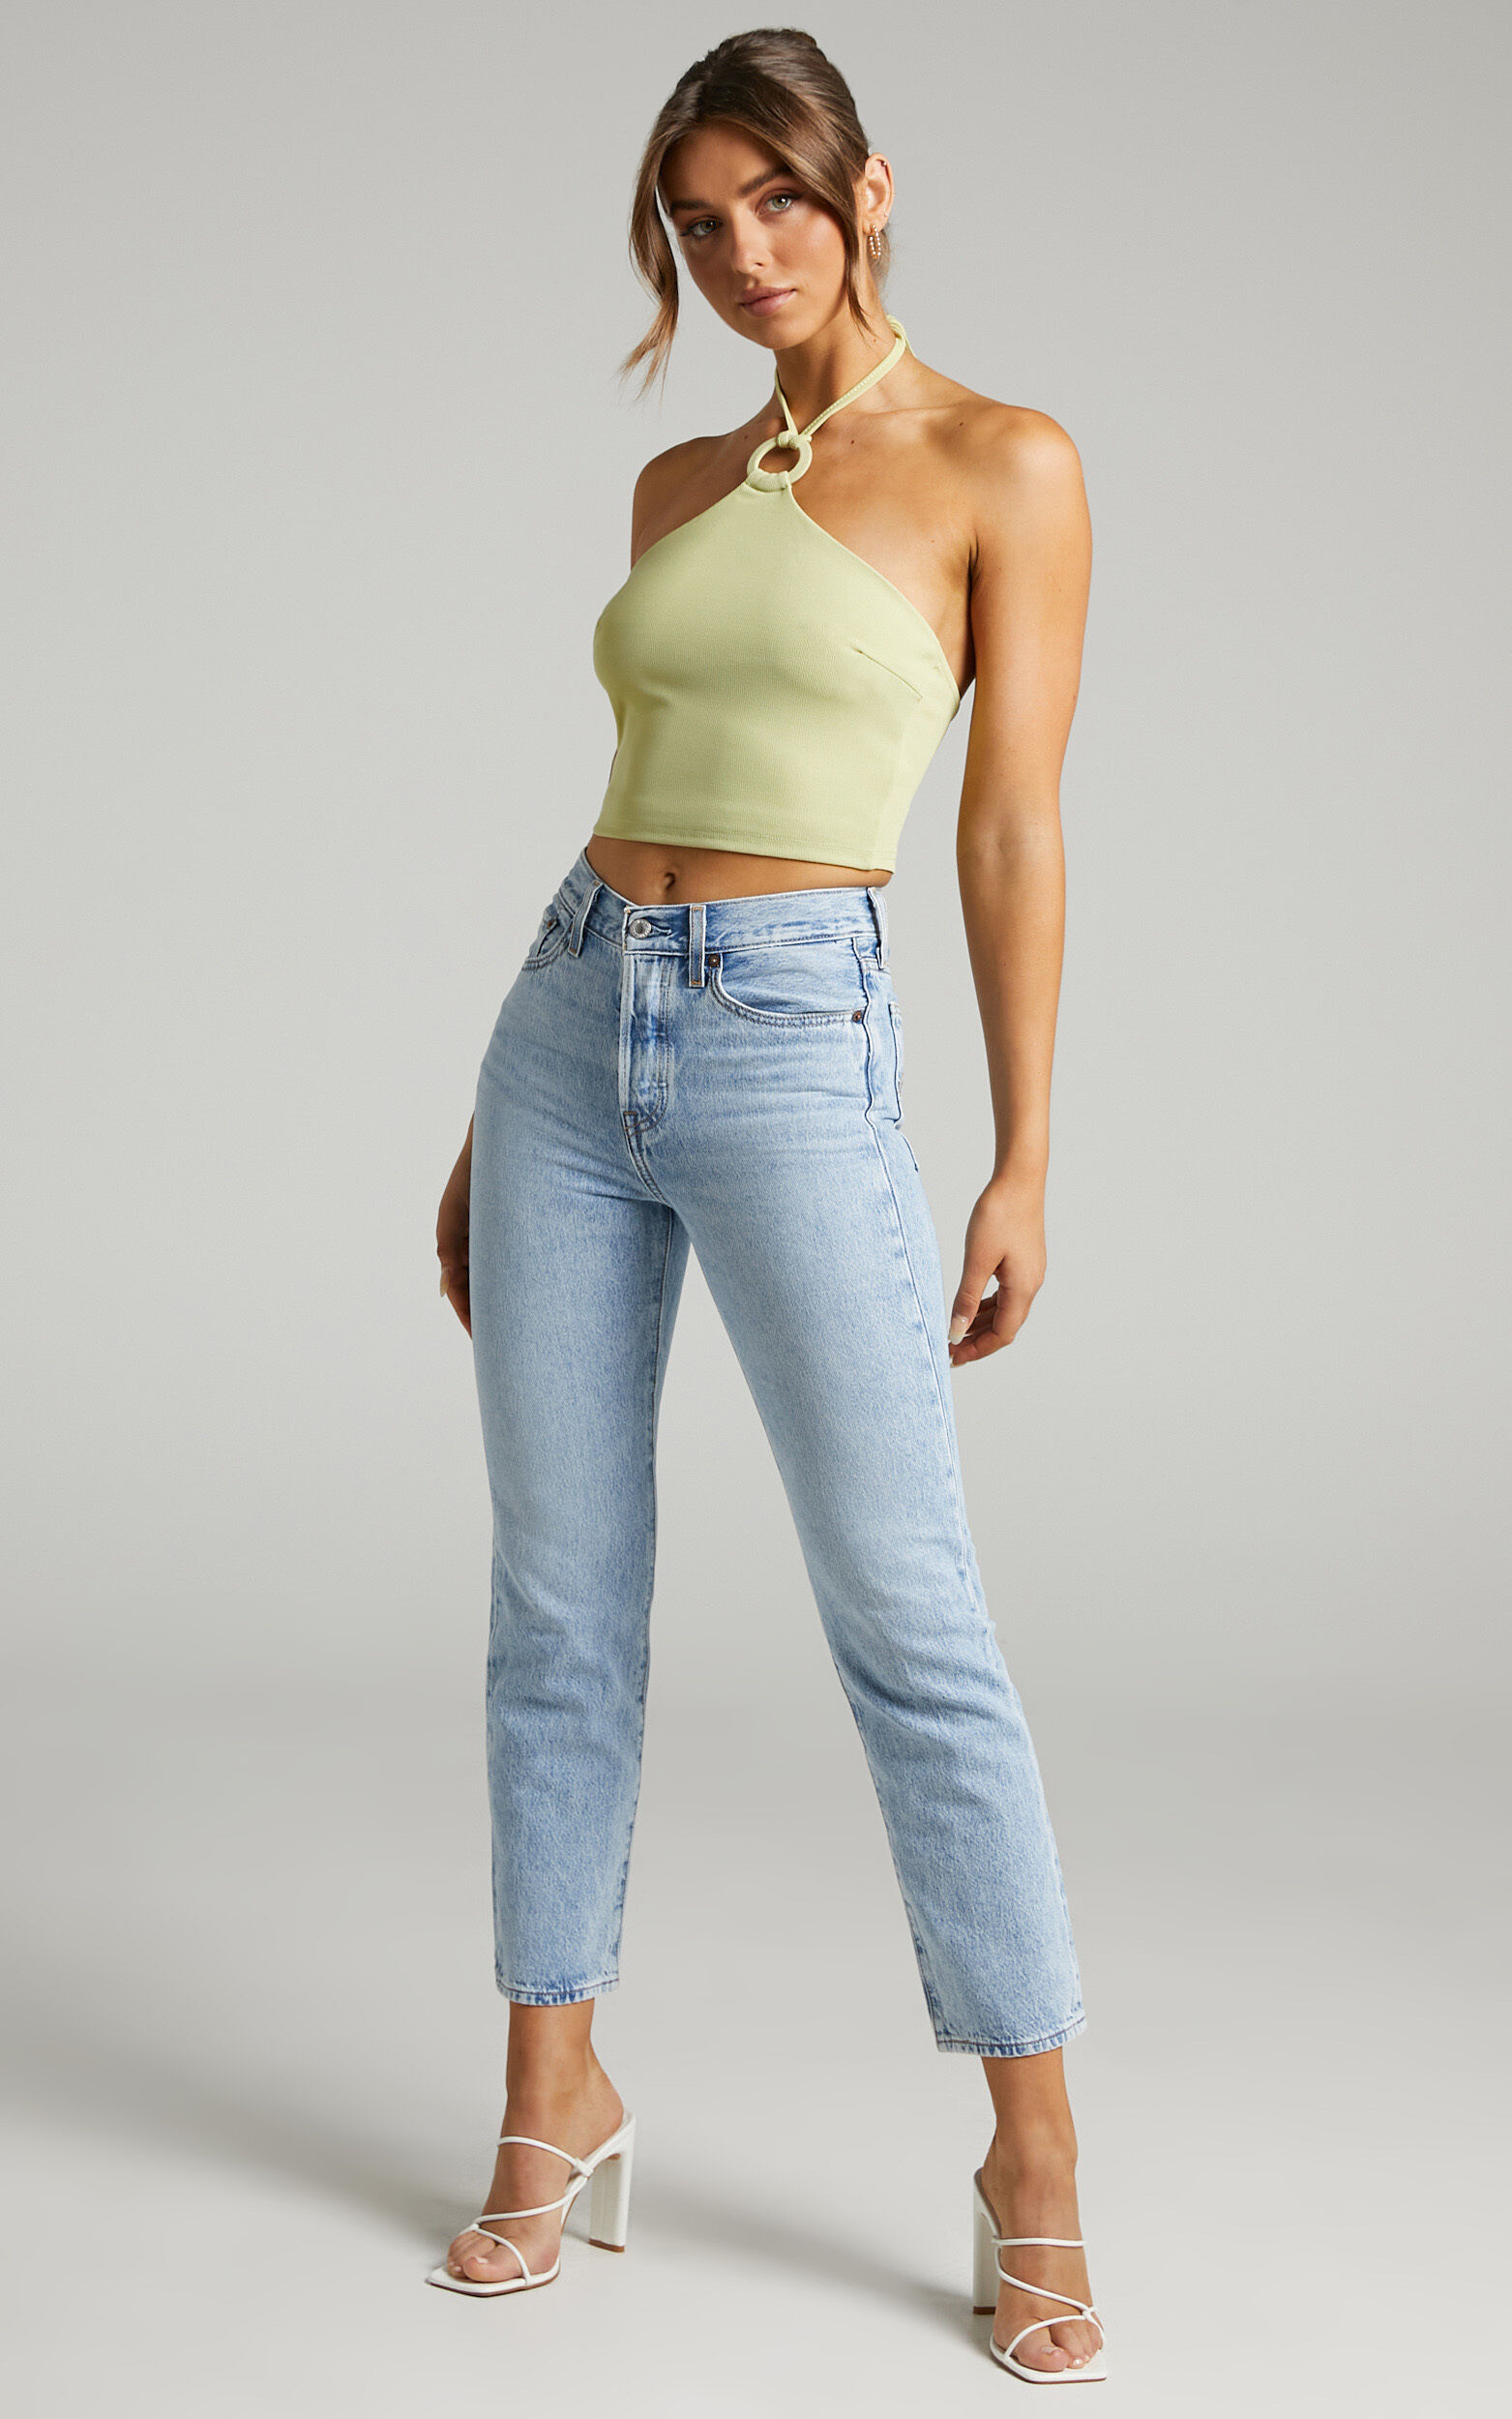 Levi's - Wedgie Straight Jean in Montgomery Baked | Showpo USA